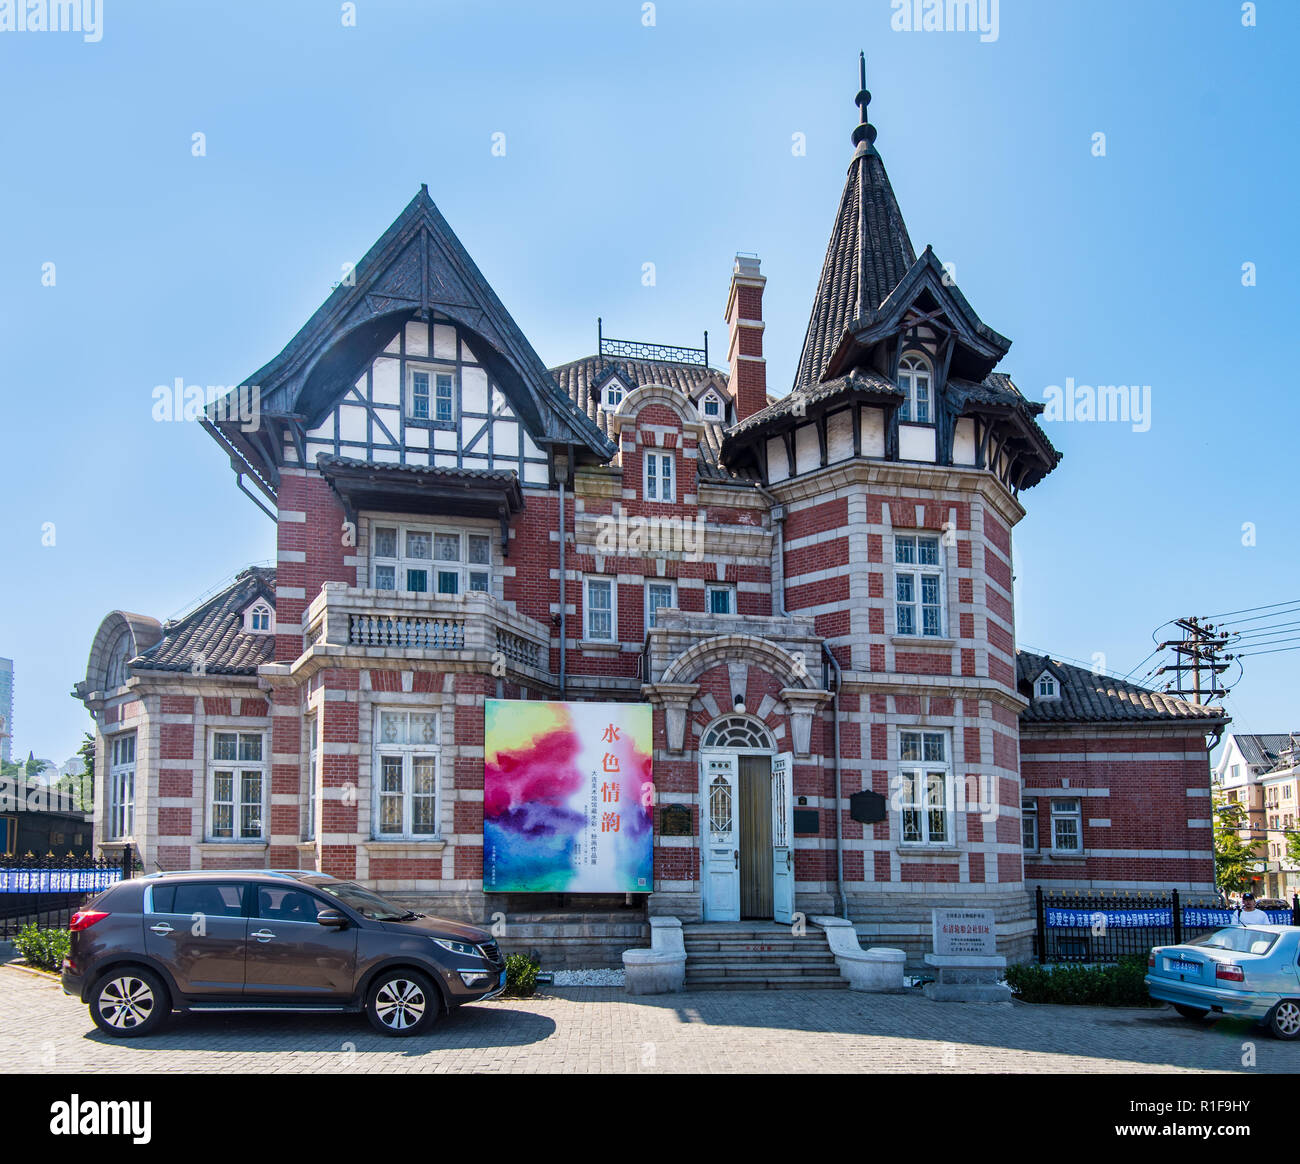 DALIAN, LIAONING, CHINA - 22JUL2018: Russian Street is home to a number of Russian Style buildings. Dalian was under Russian Control for a period endi Stock Photo